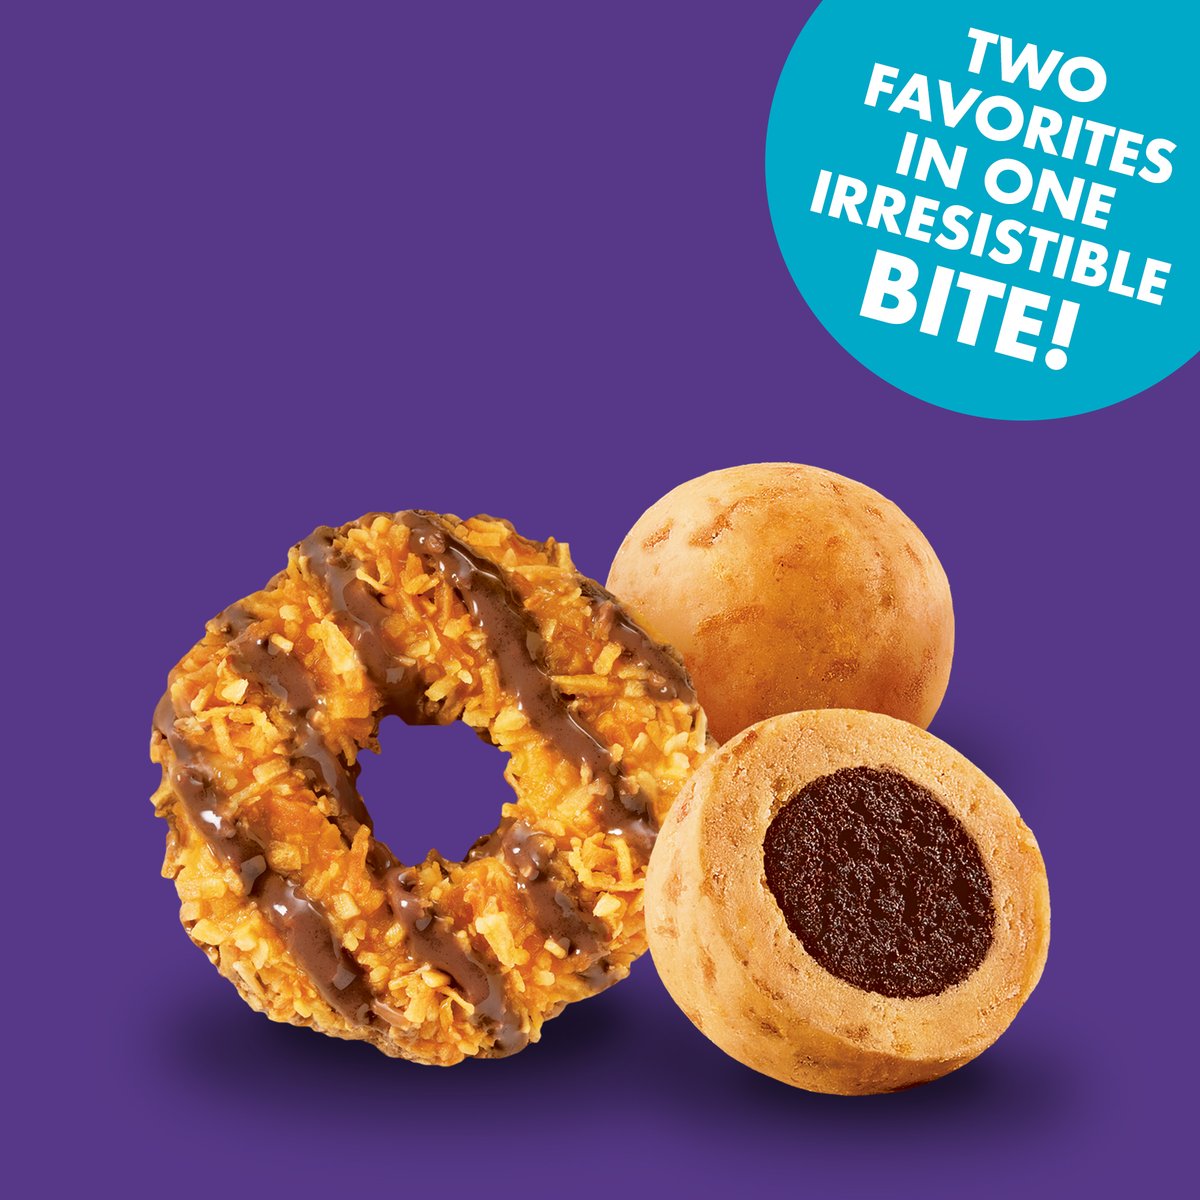 Inspired by the Girl Scout Coconut Caramel cookie, this bite features a chocolatey cookie center encased in a velvety SKIPPY® peanut butter coating. This bite is perfectly flavored with notes of toasted coconut and caramel and finished with real toasted coconut flakes.